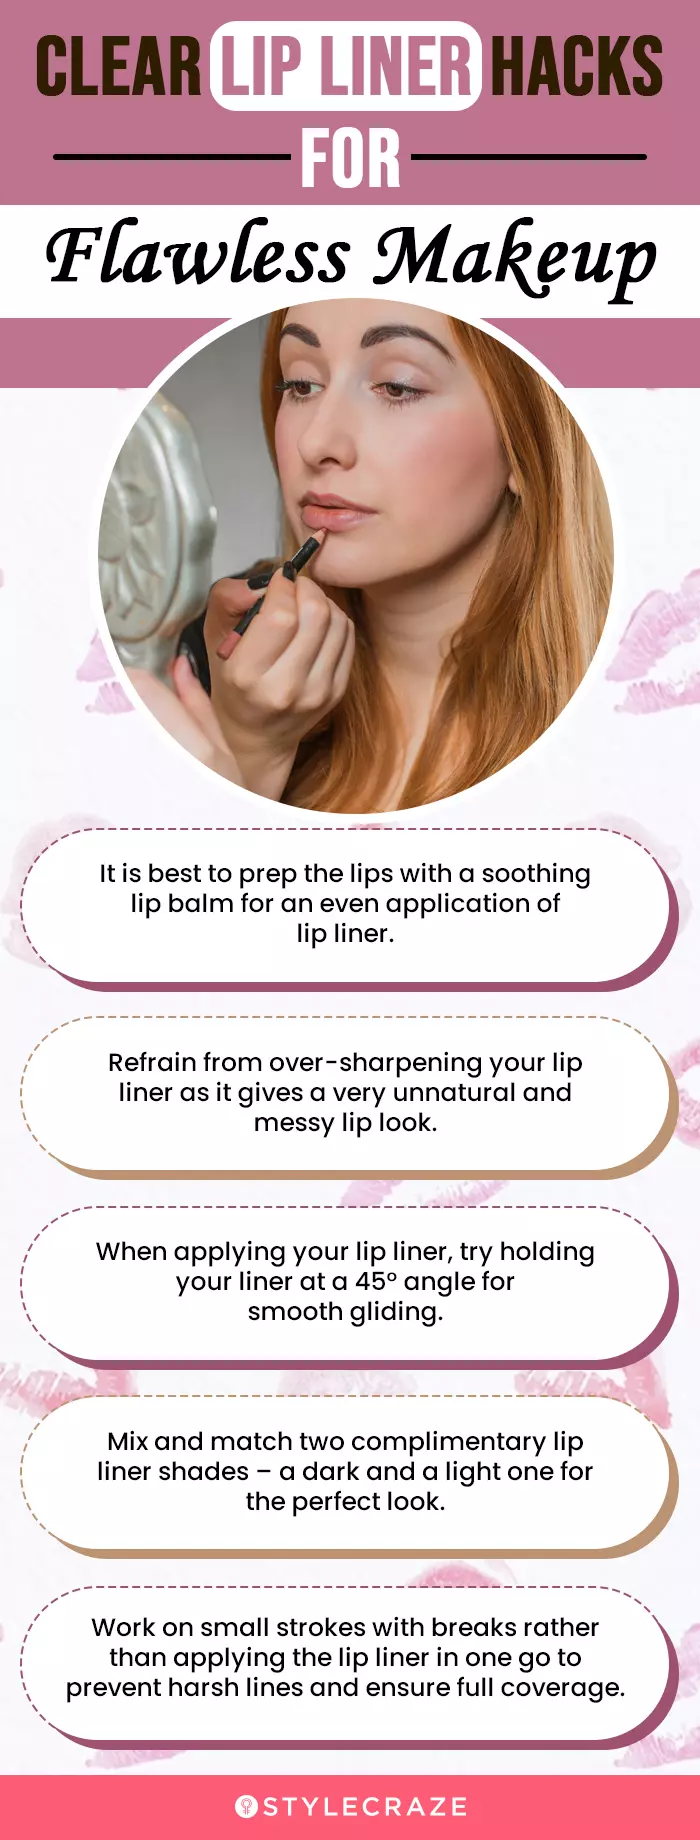 Clear Lip Liner Hacks For Flawless Makeup(infographic)